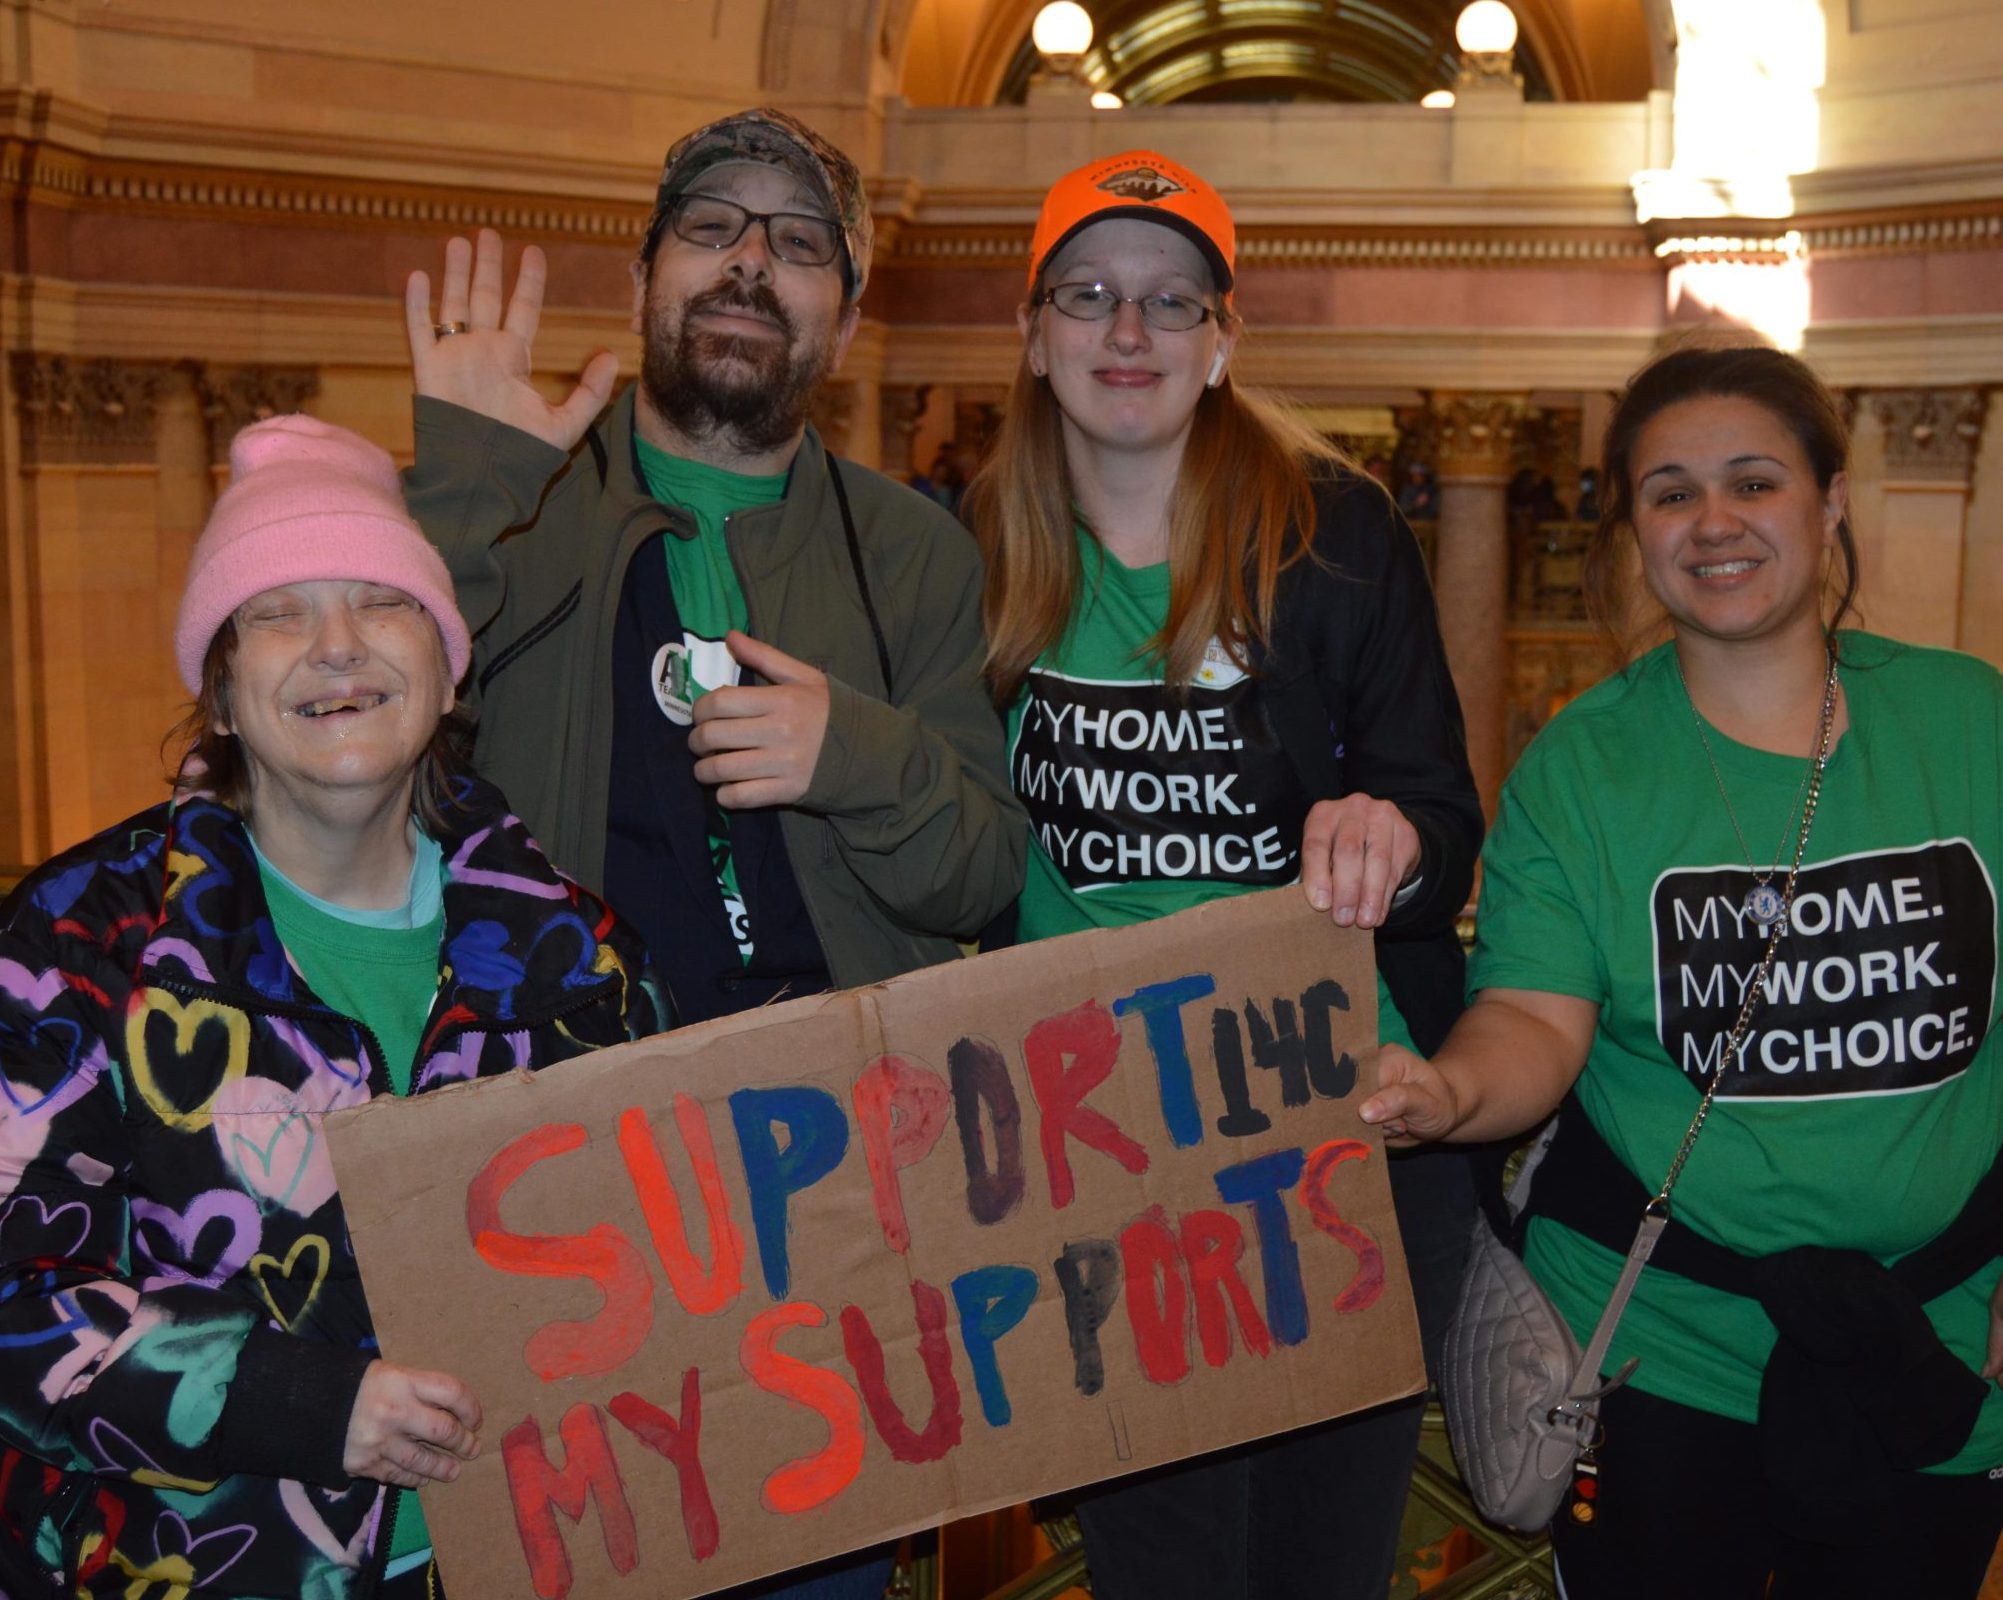 clients holding "support my supports" sign at capitol